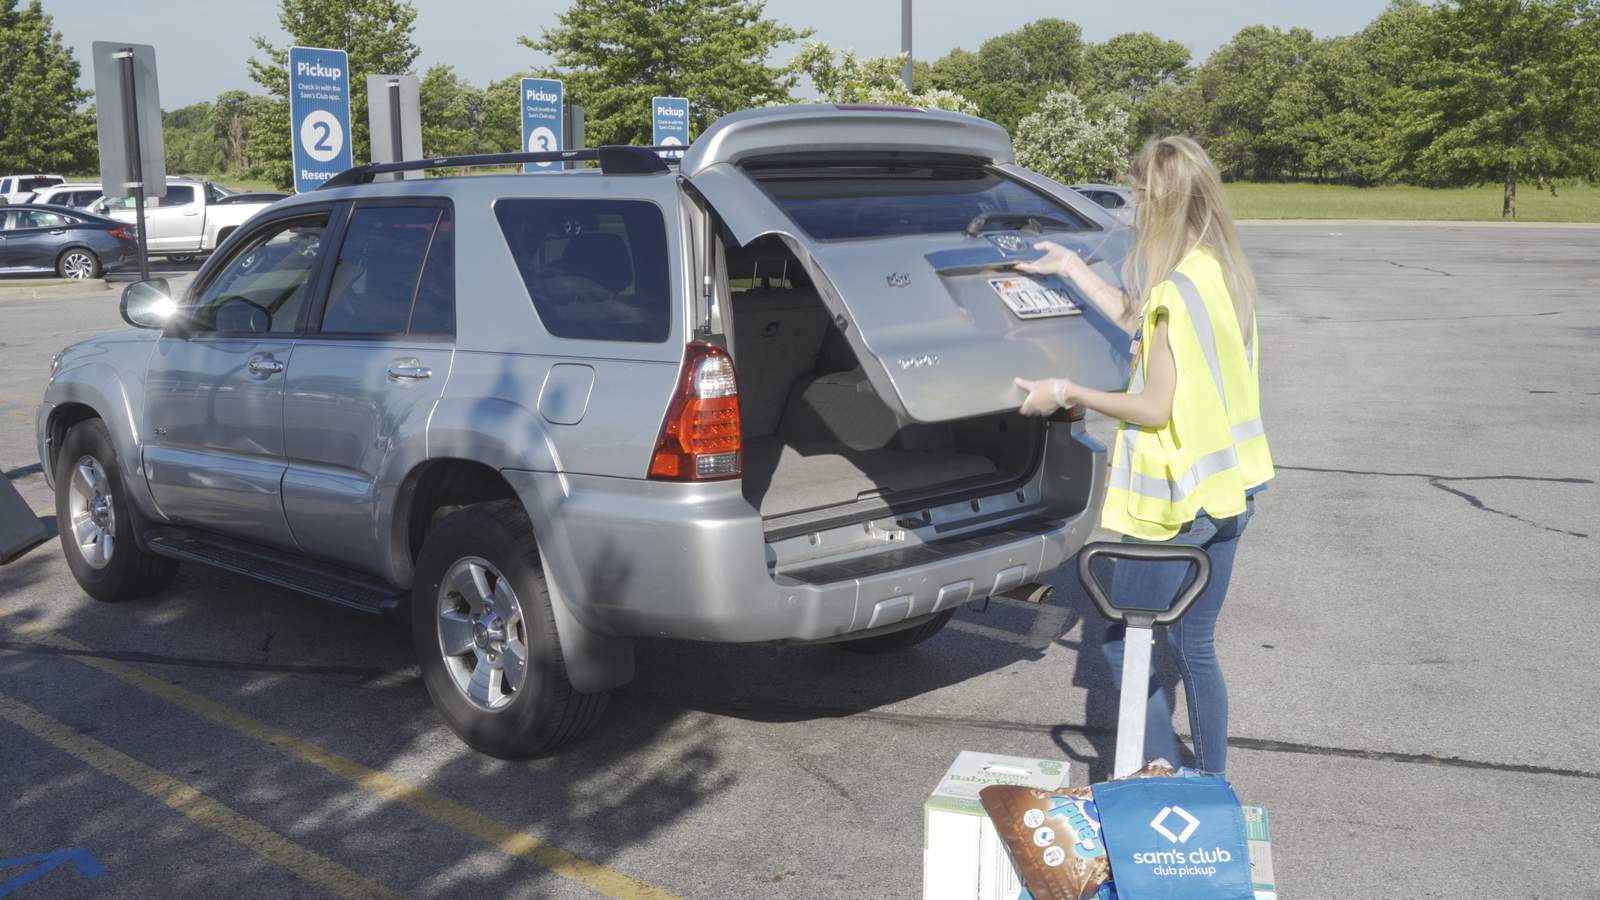 Sams Club will offer curbside pickup nationwide by end of June